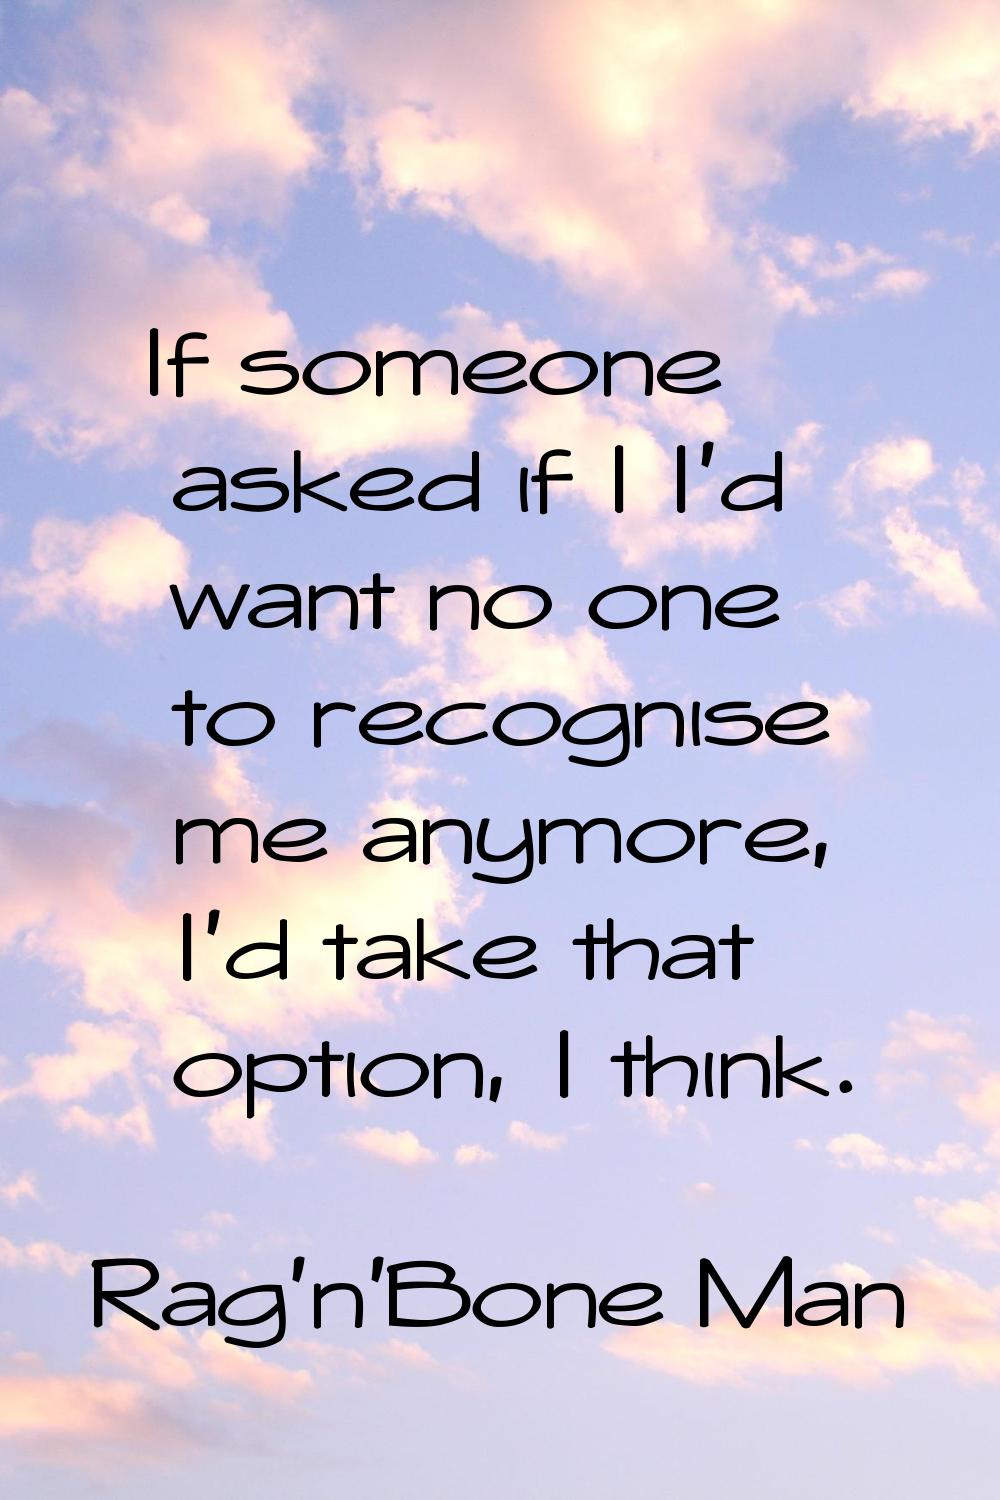 If someone asked if I I'd want no one to recognise me anymore, I'd take that option, I think.